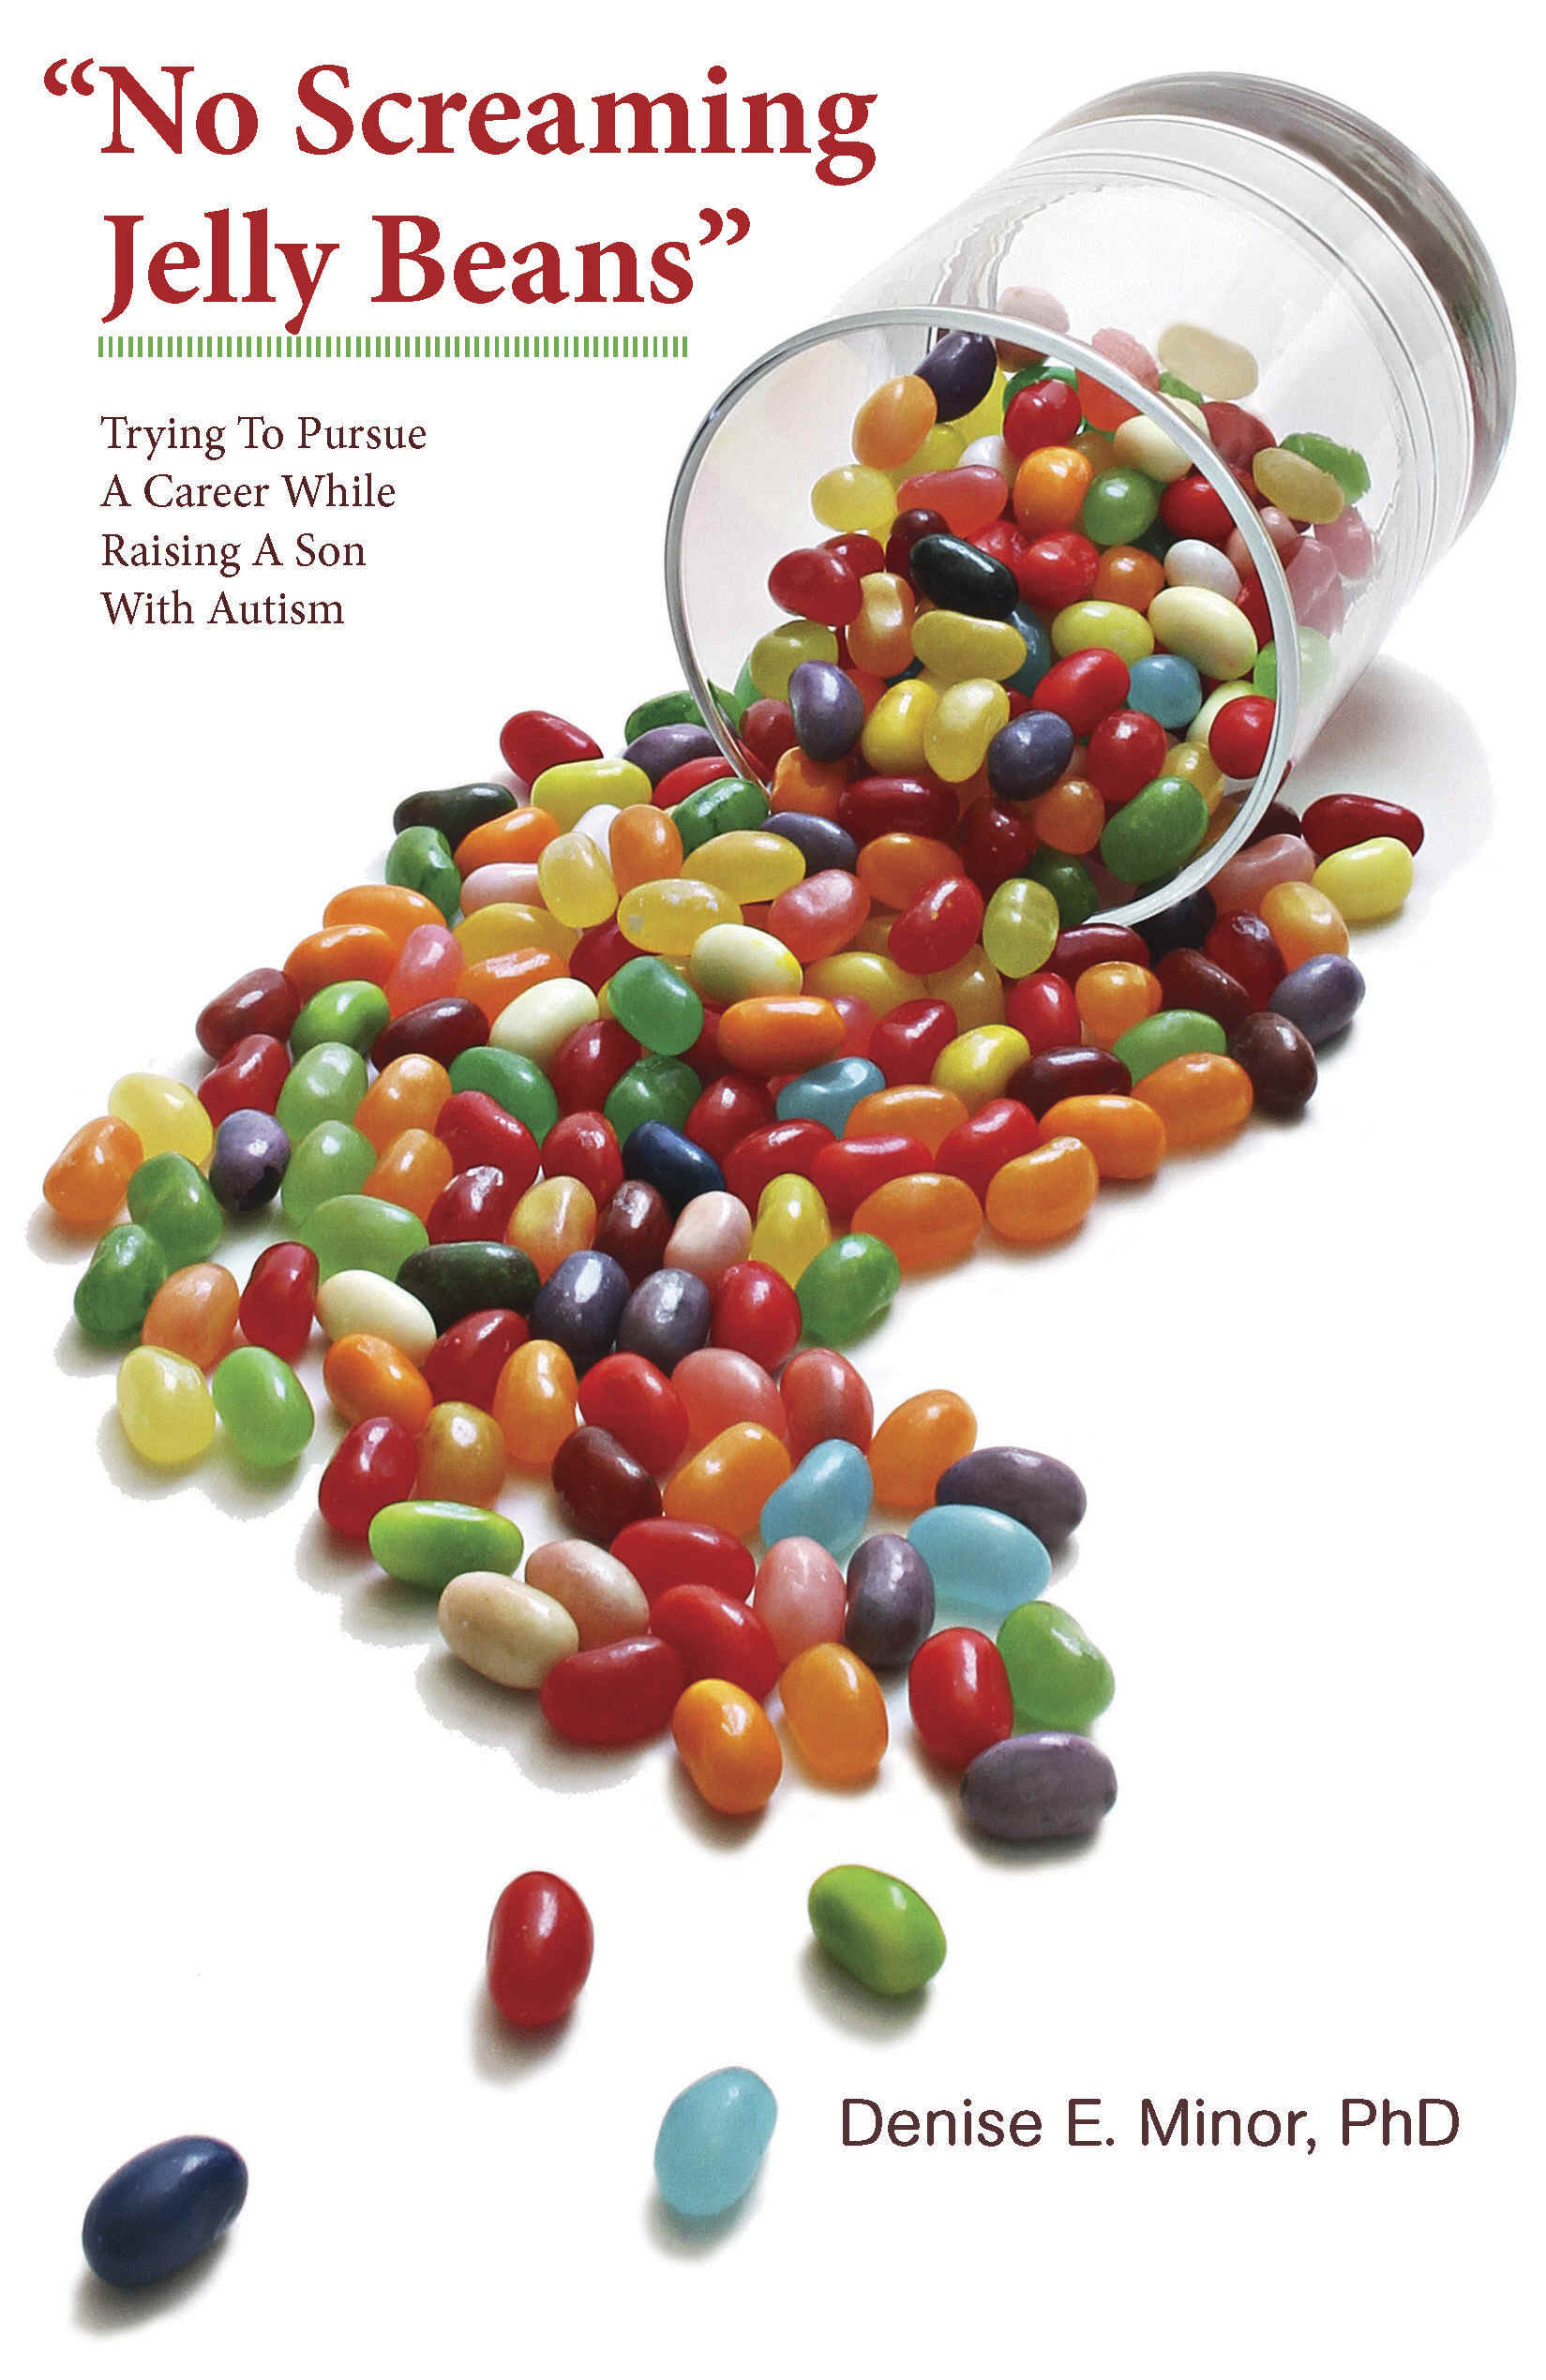 "No Screaming Jelly Beans" by Denise Minor